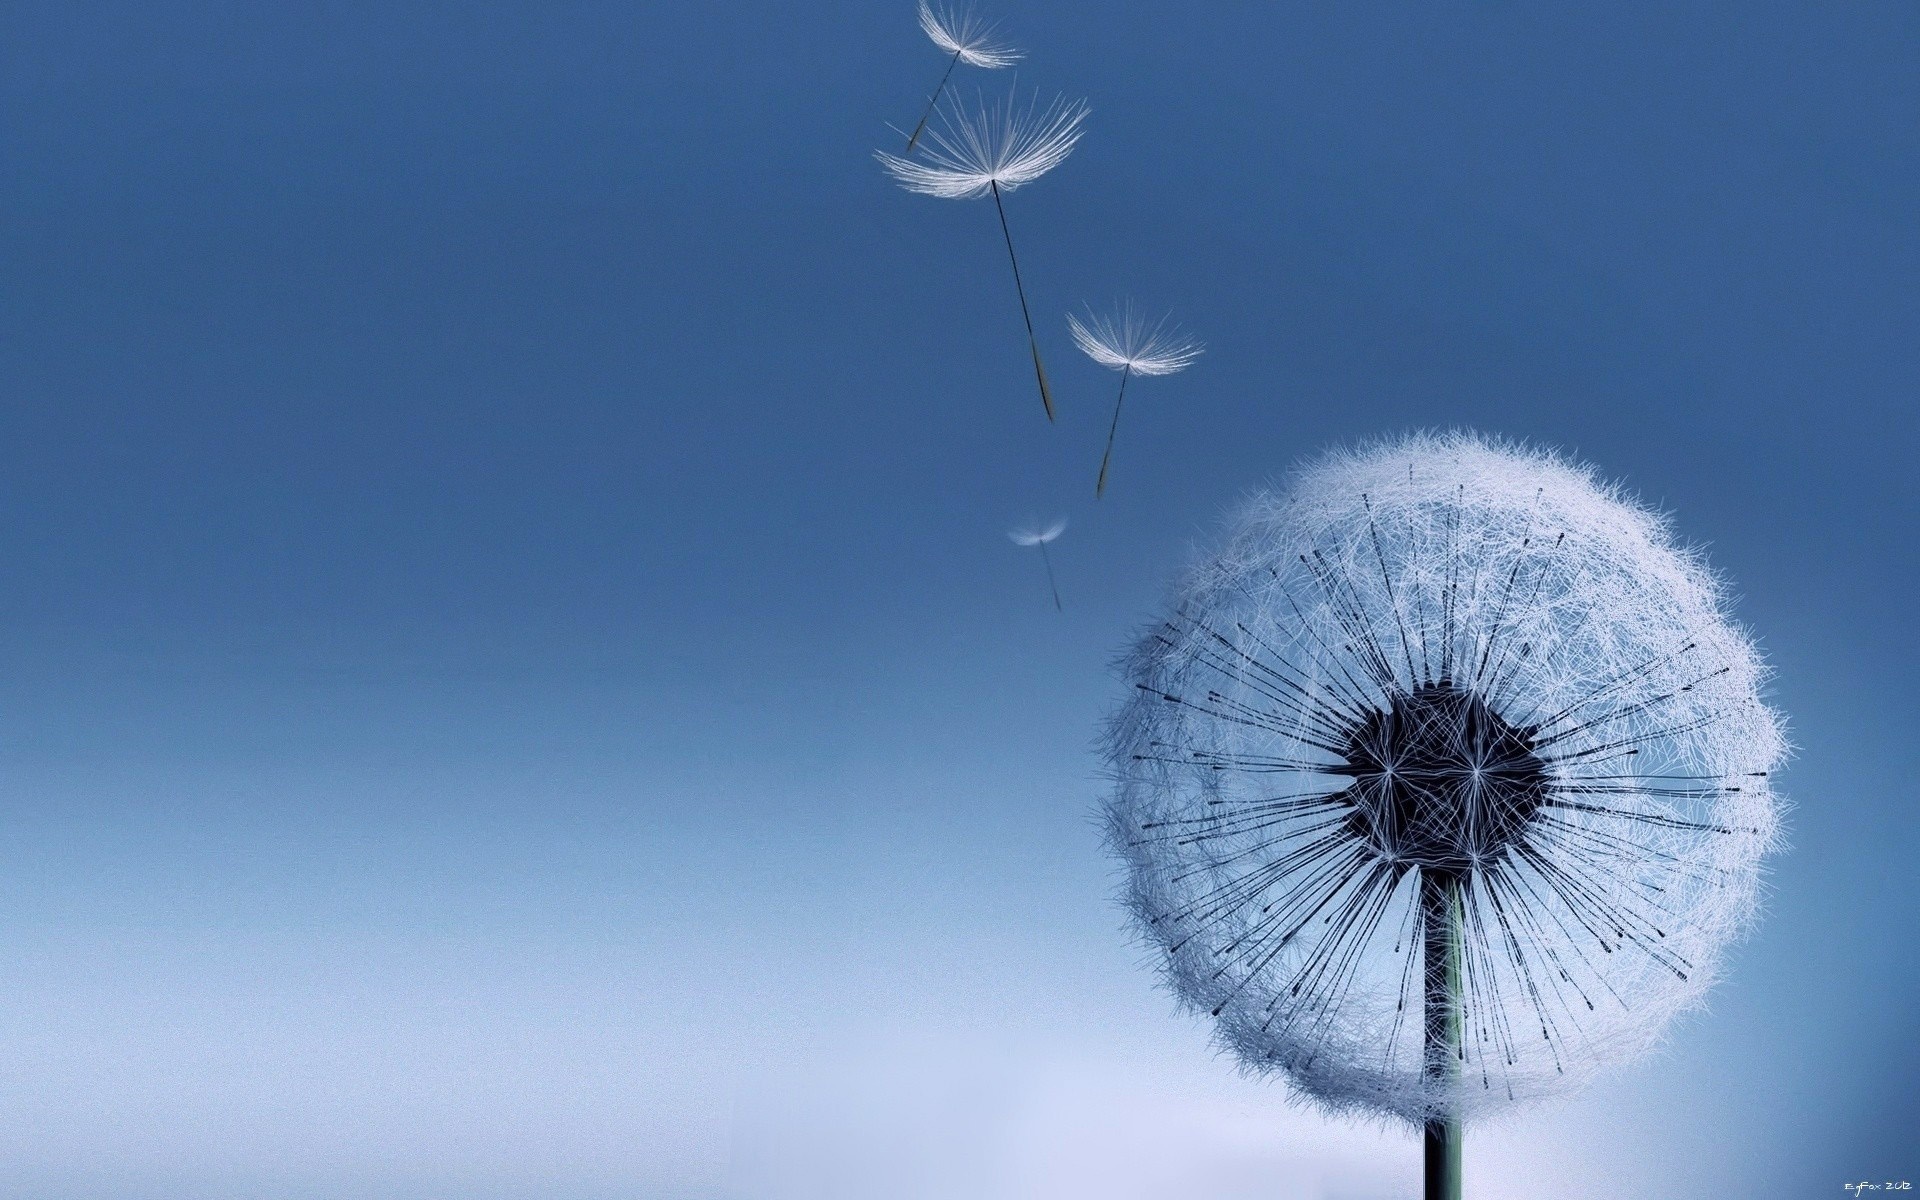 Dandelion Flowers Wallpapers HD Pictures One HD